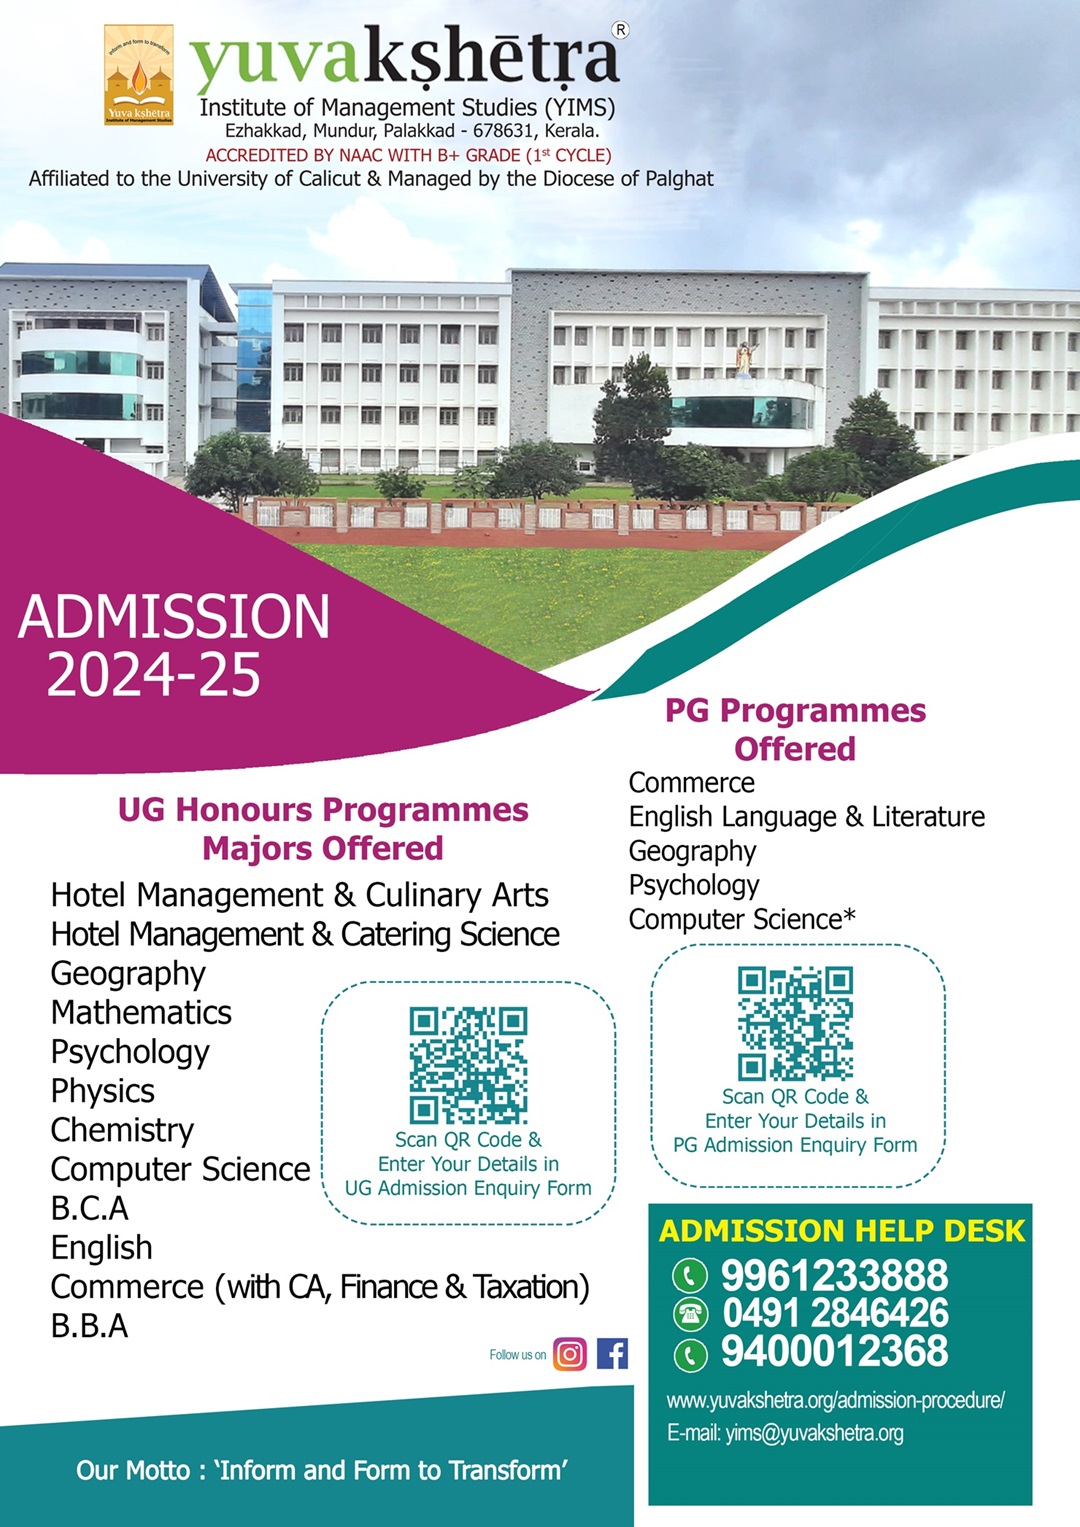 YIMS -admission